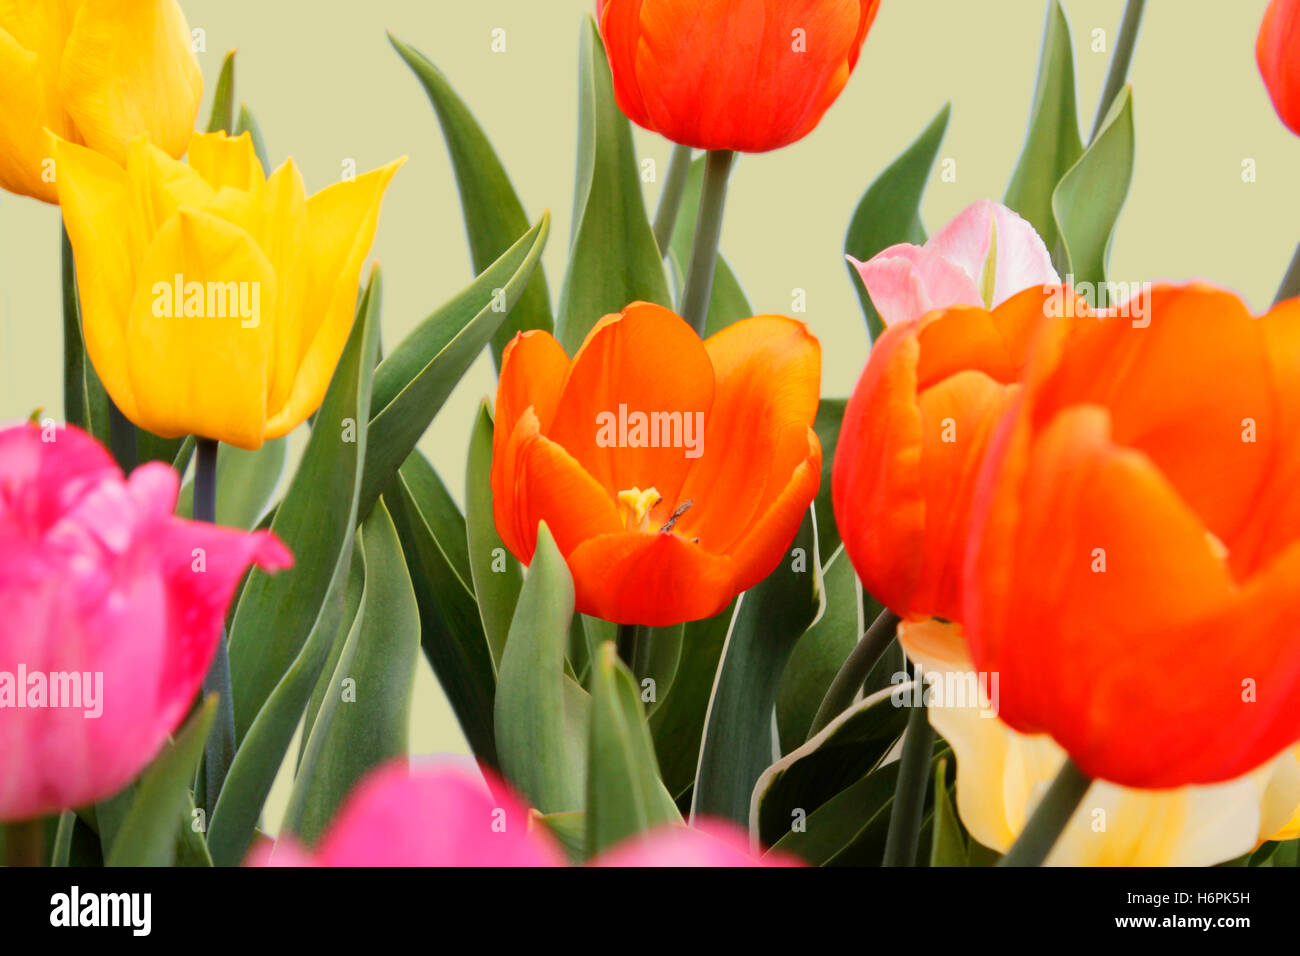 yellow,pink colored and orange tulips Stock Photo